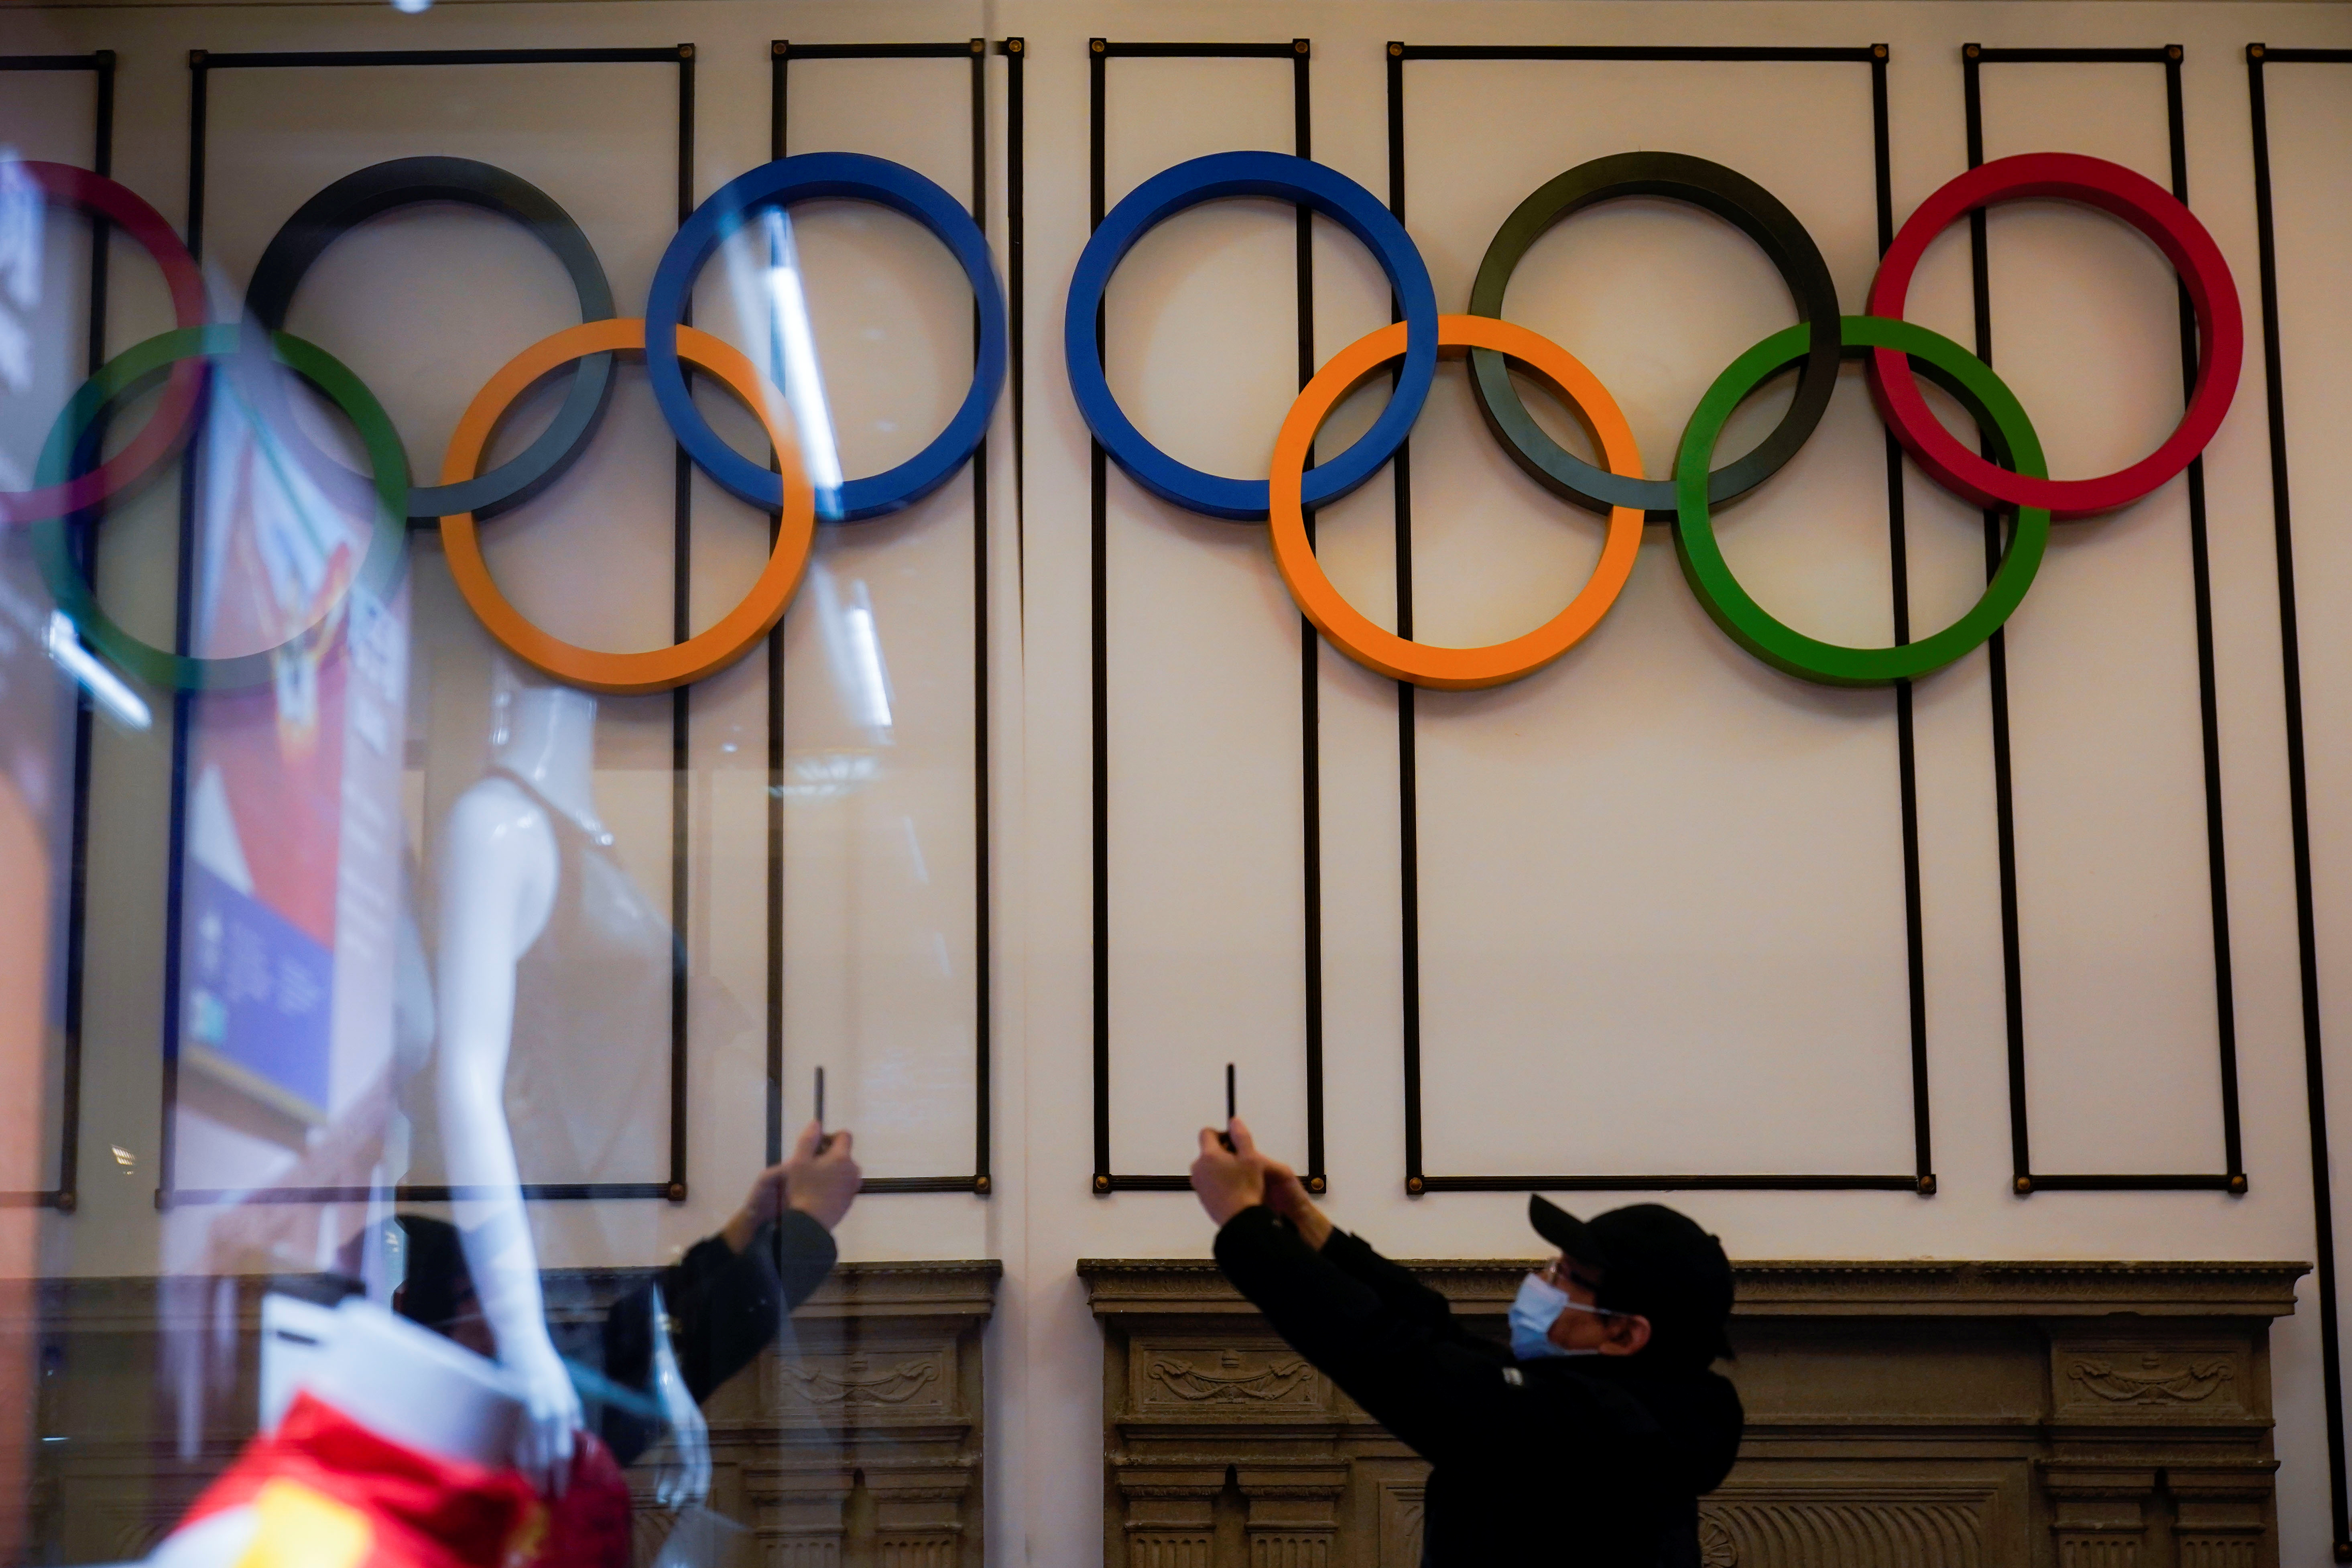 A visitor takes pictures near Olympic rings displayed at the Shanghai Sports Museum in Shanghai, China, December 8, 2021. REUTERS/Aly Song